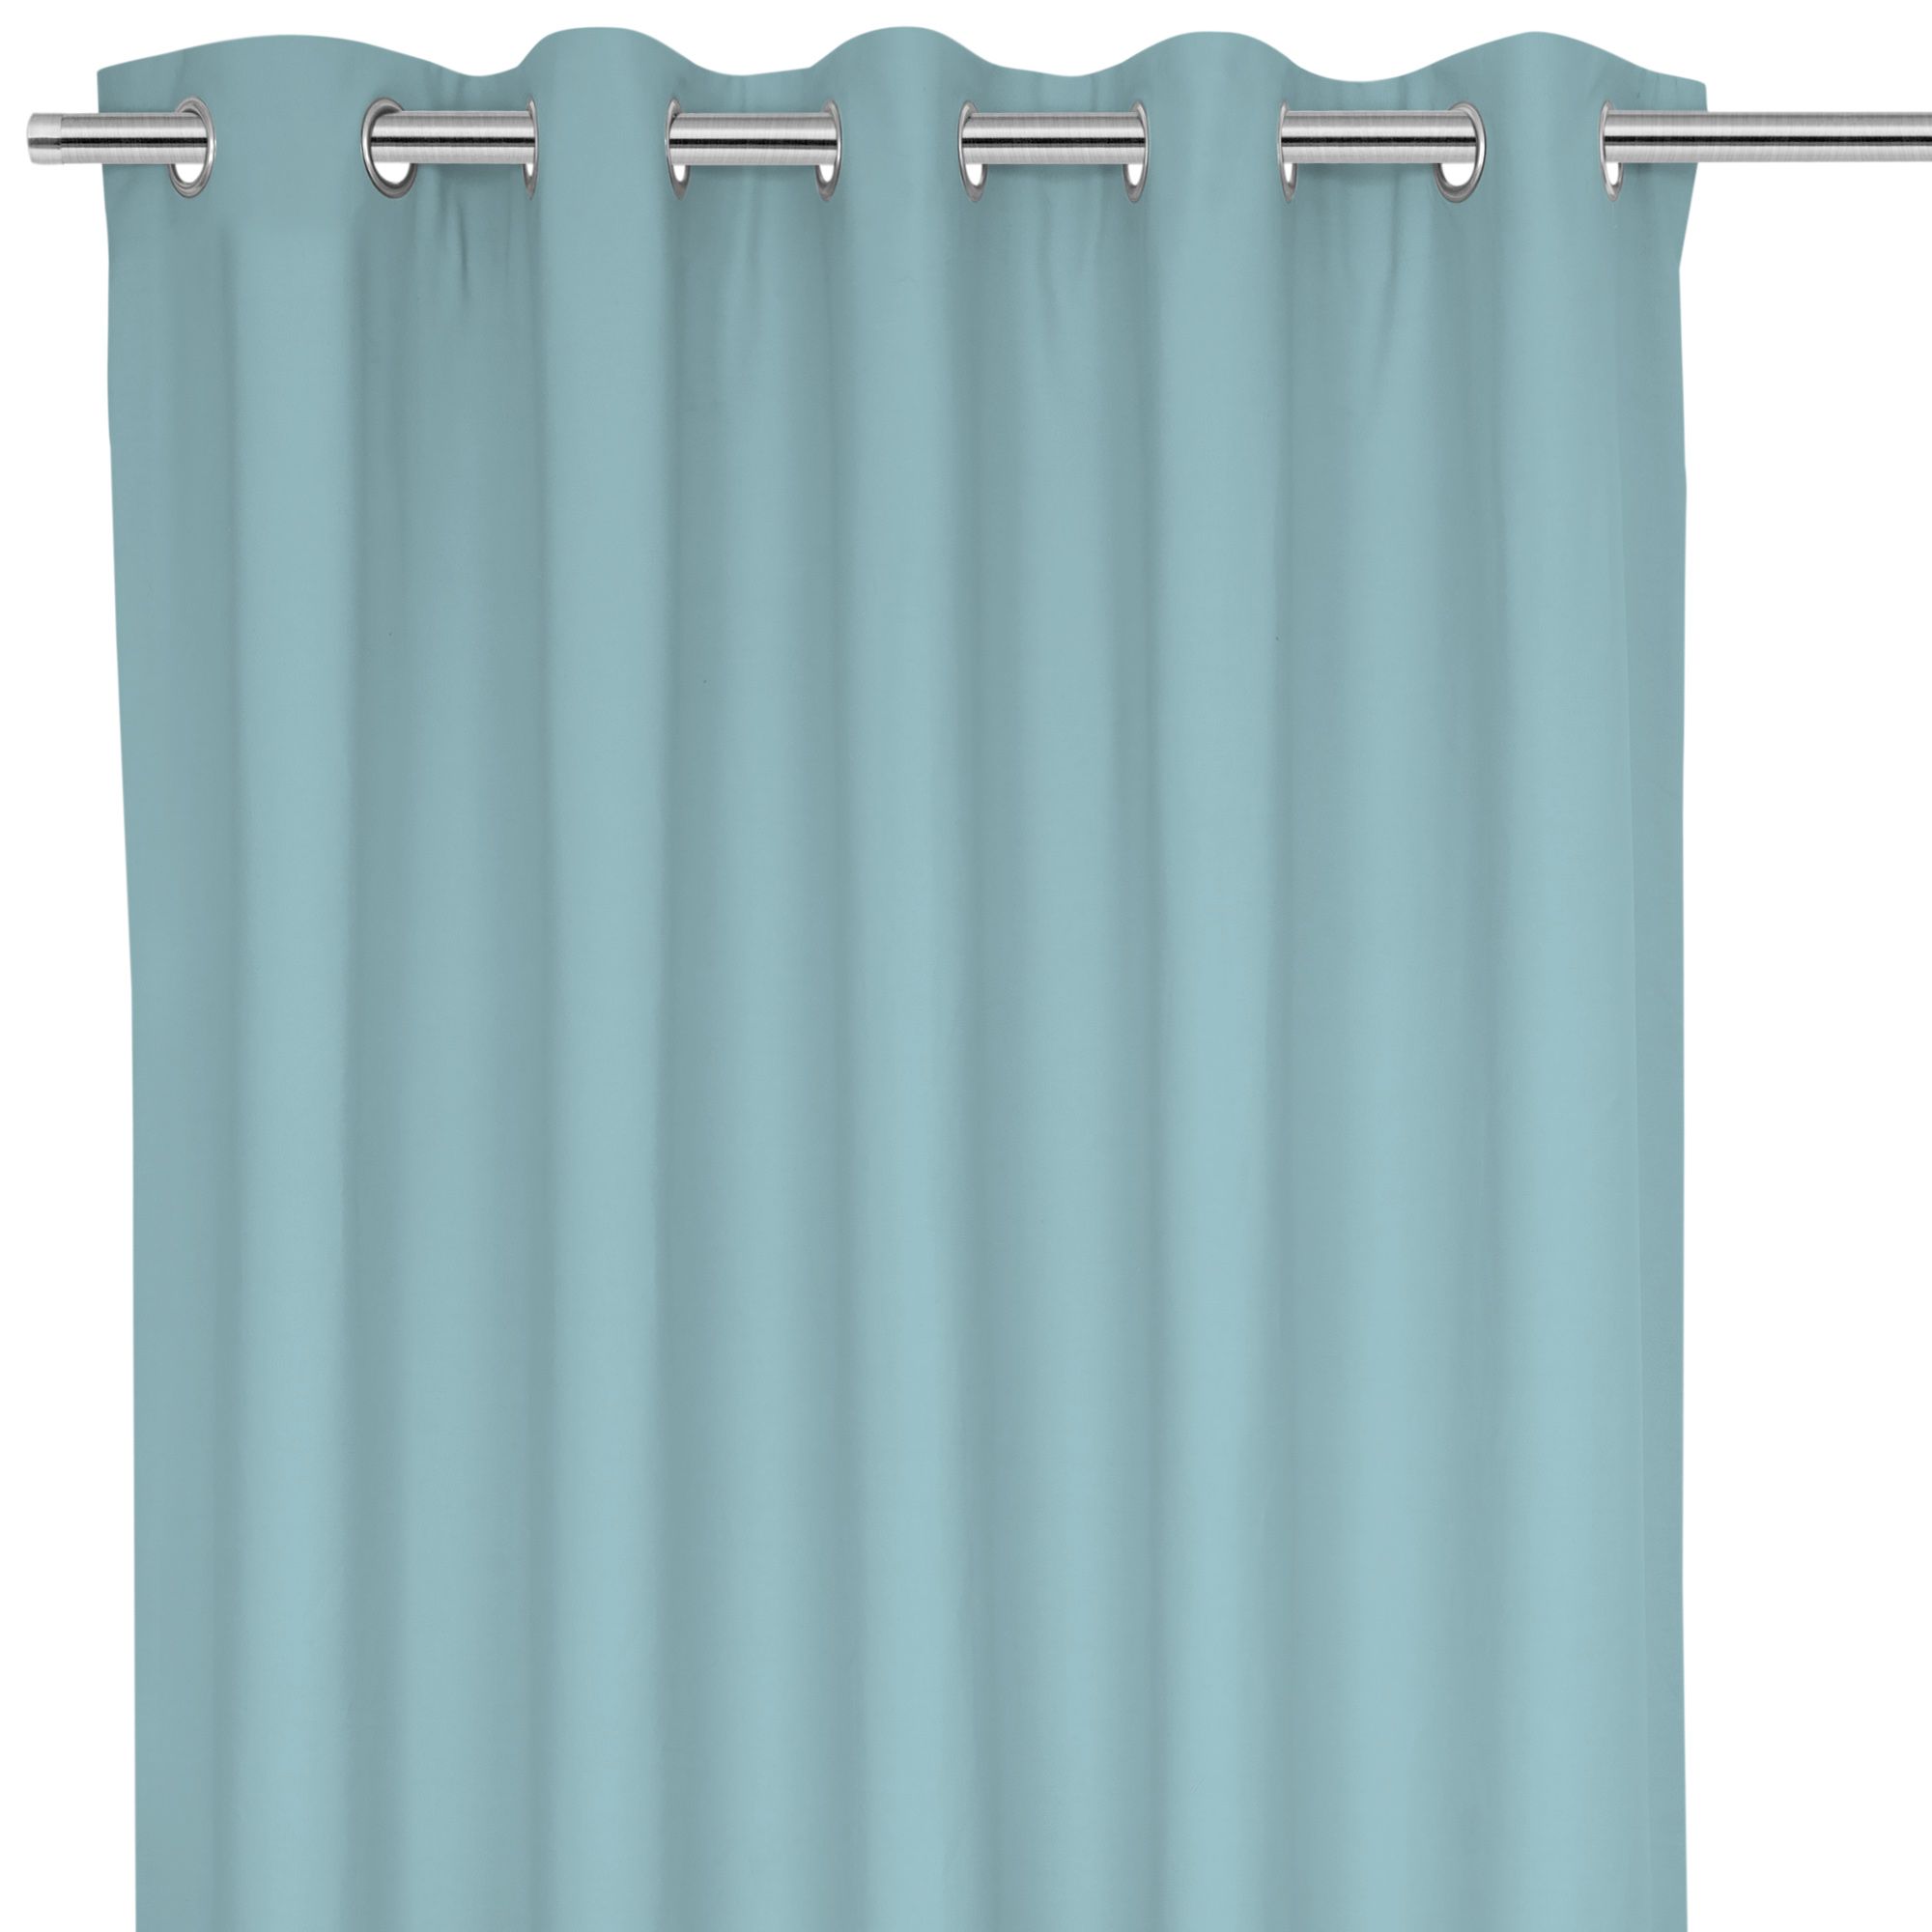 Hiva Light blue Solid dyed Lined Eyelet Curtain (W)167cm (L)183cm, Pair